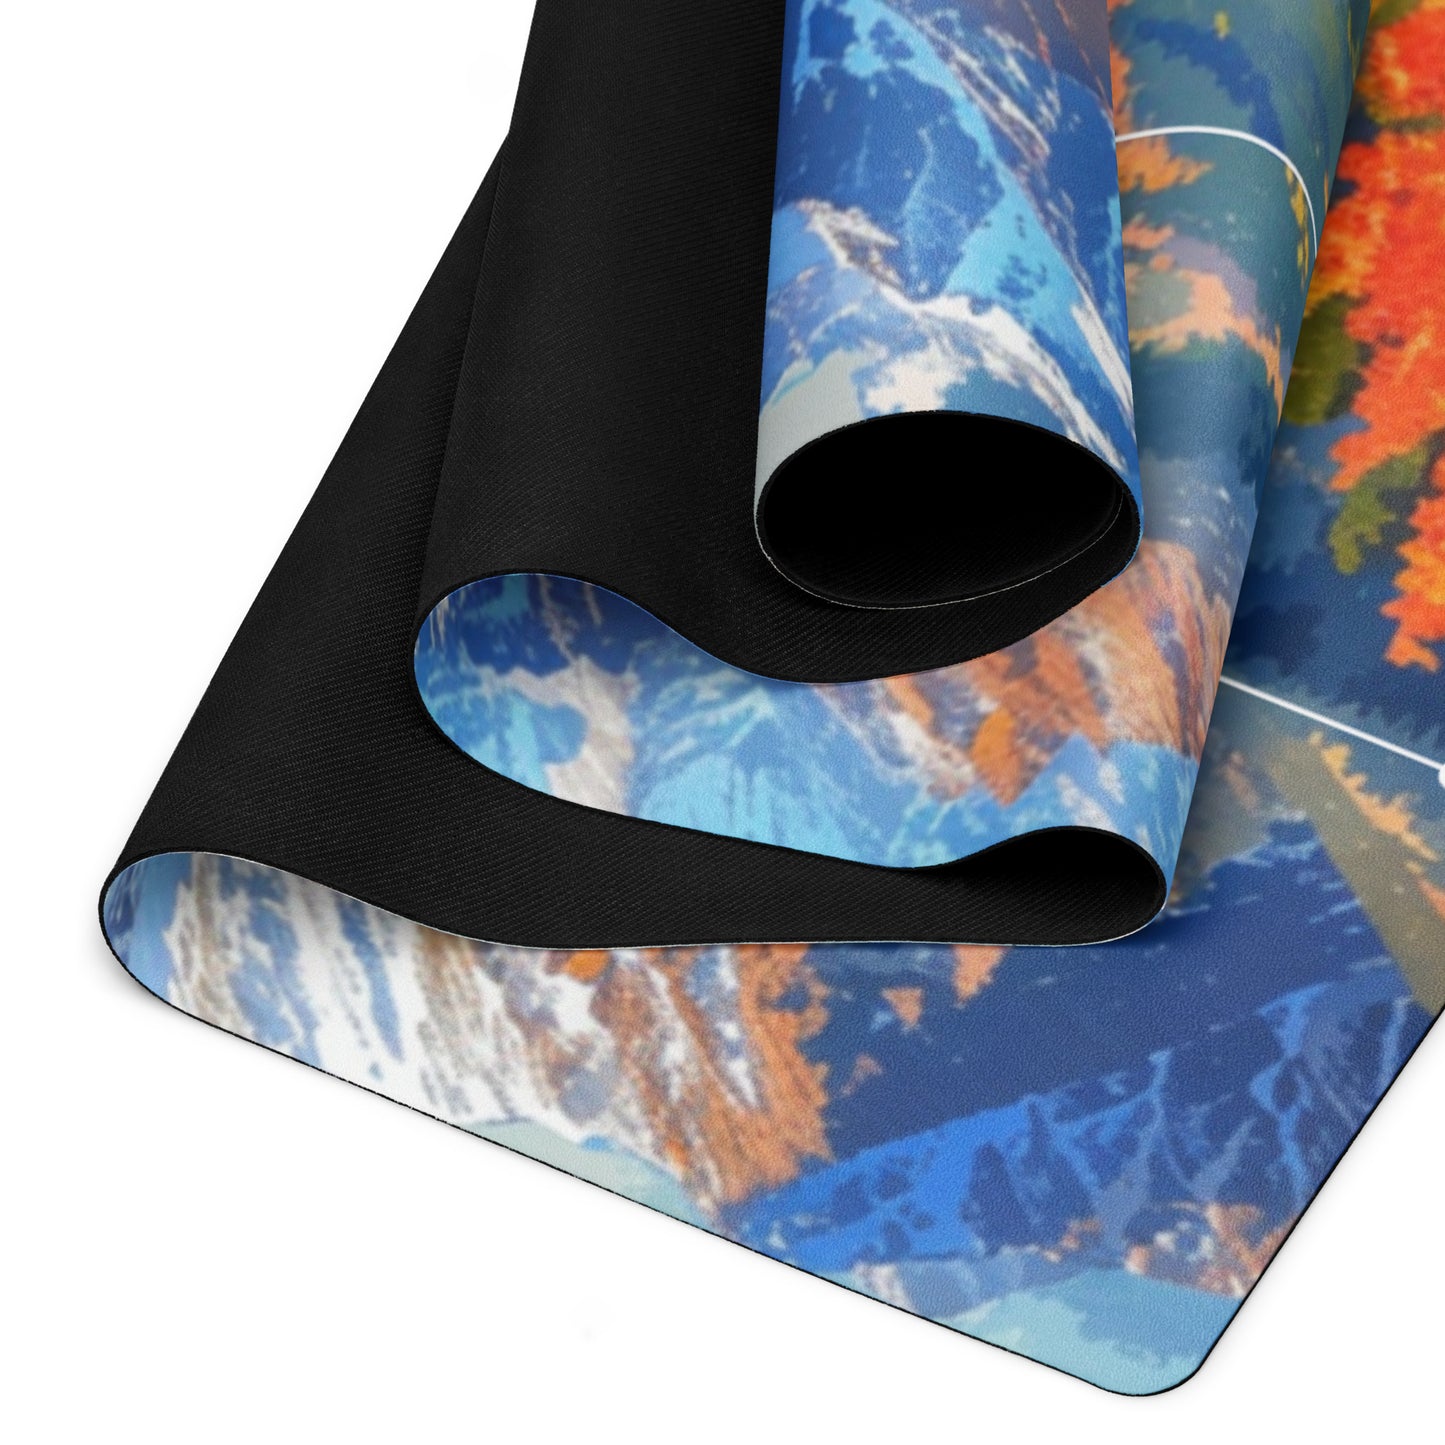 CO Mountains Alignment Yoga mat